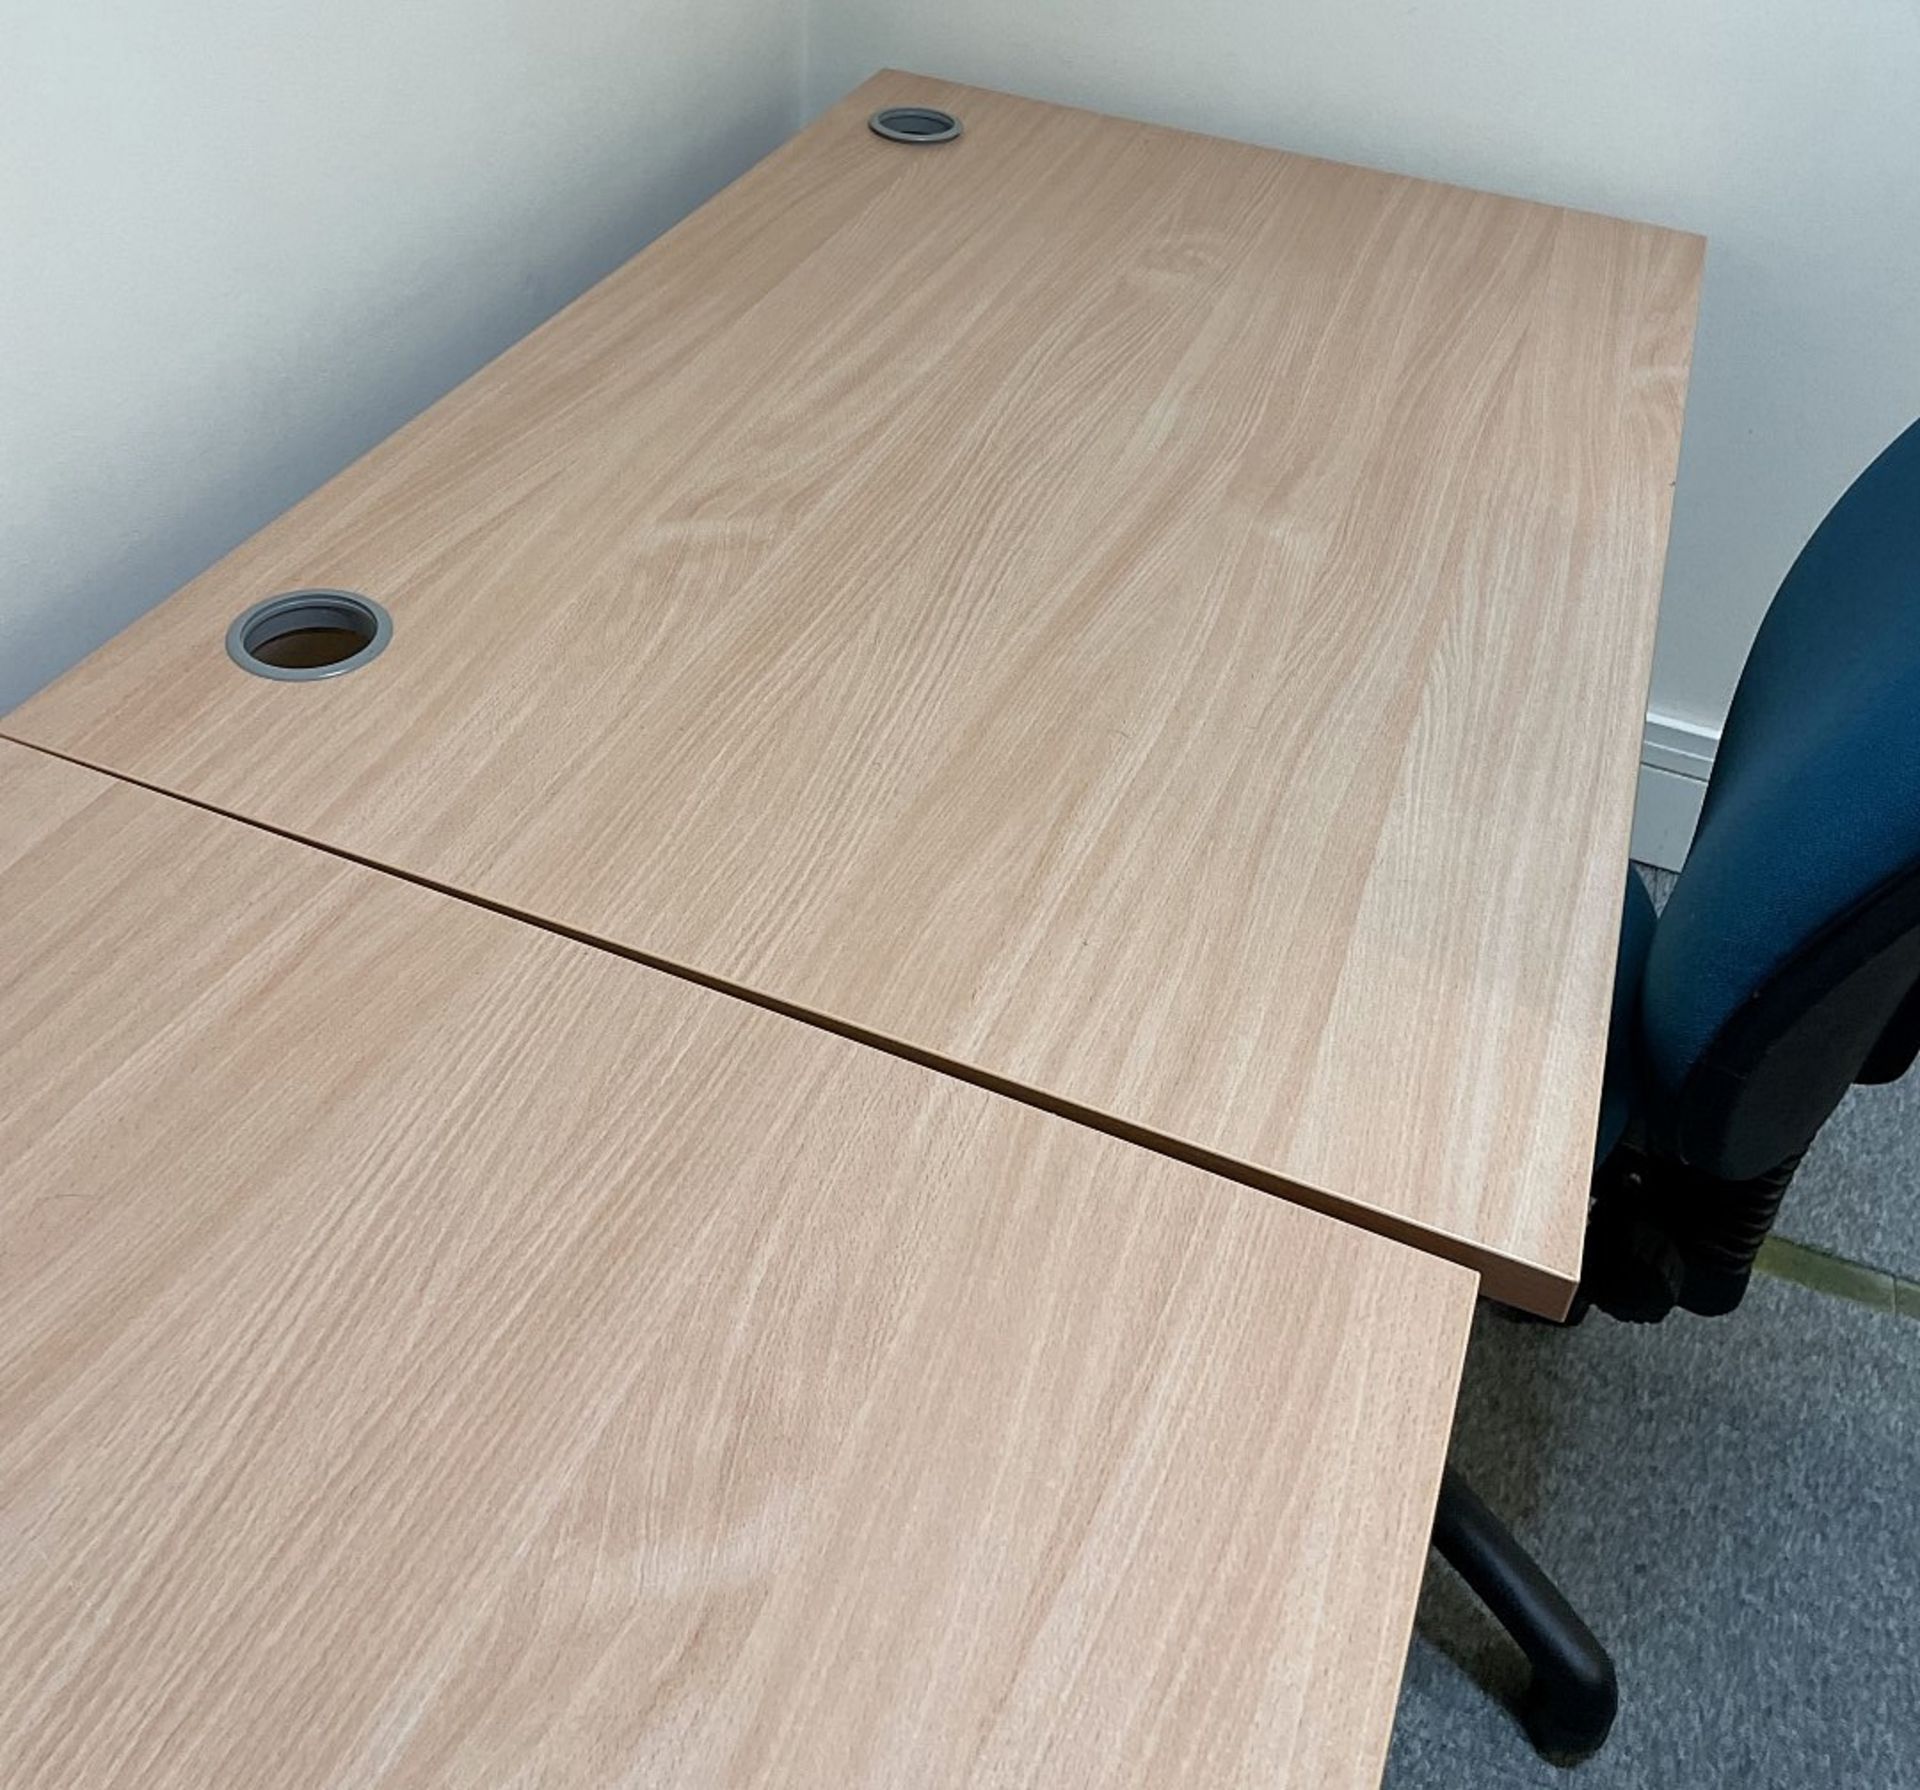 2 x Rectangular Office Desks Featuring A Beech Finish And Cable Ports - Image 2 of 5